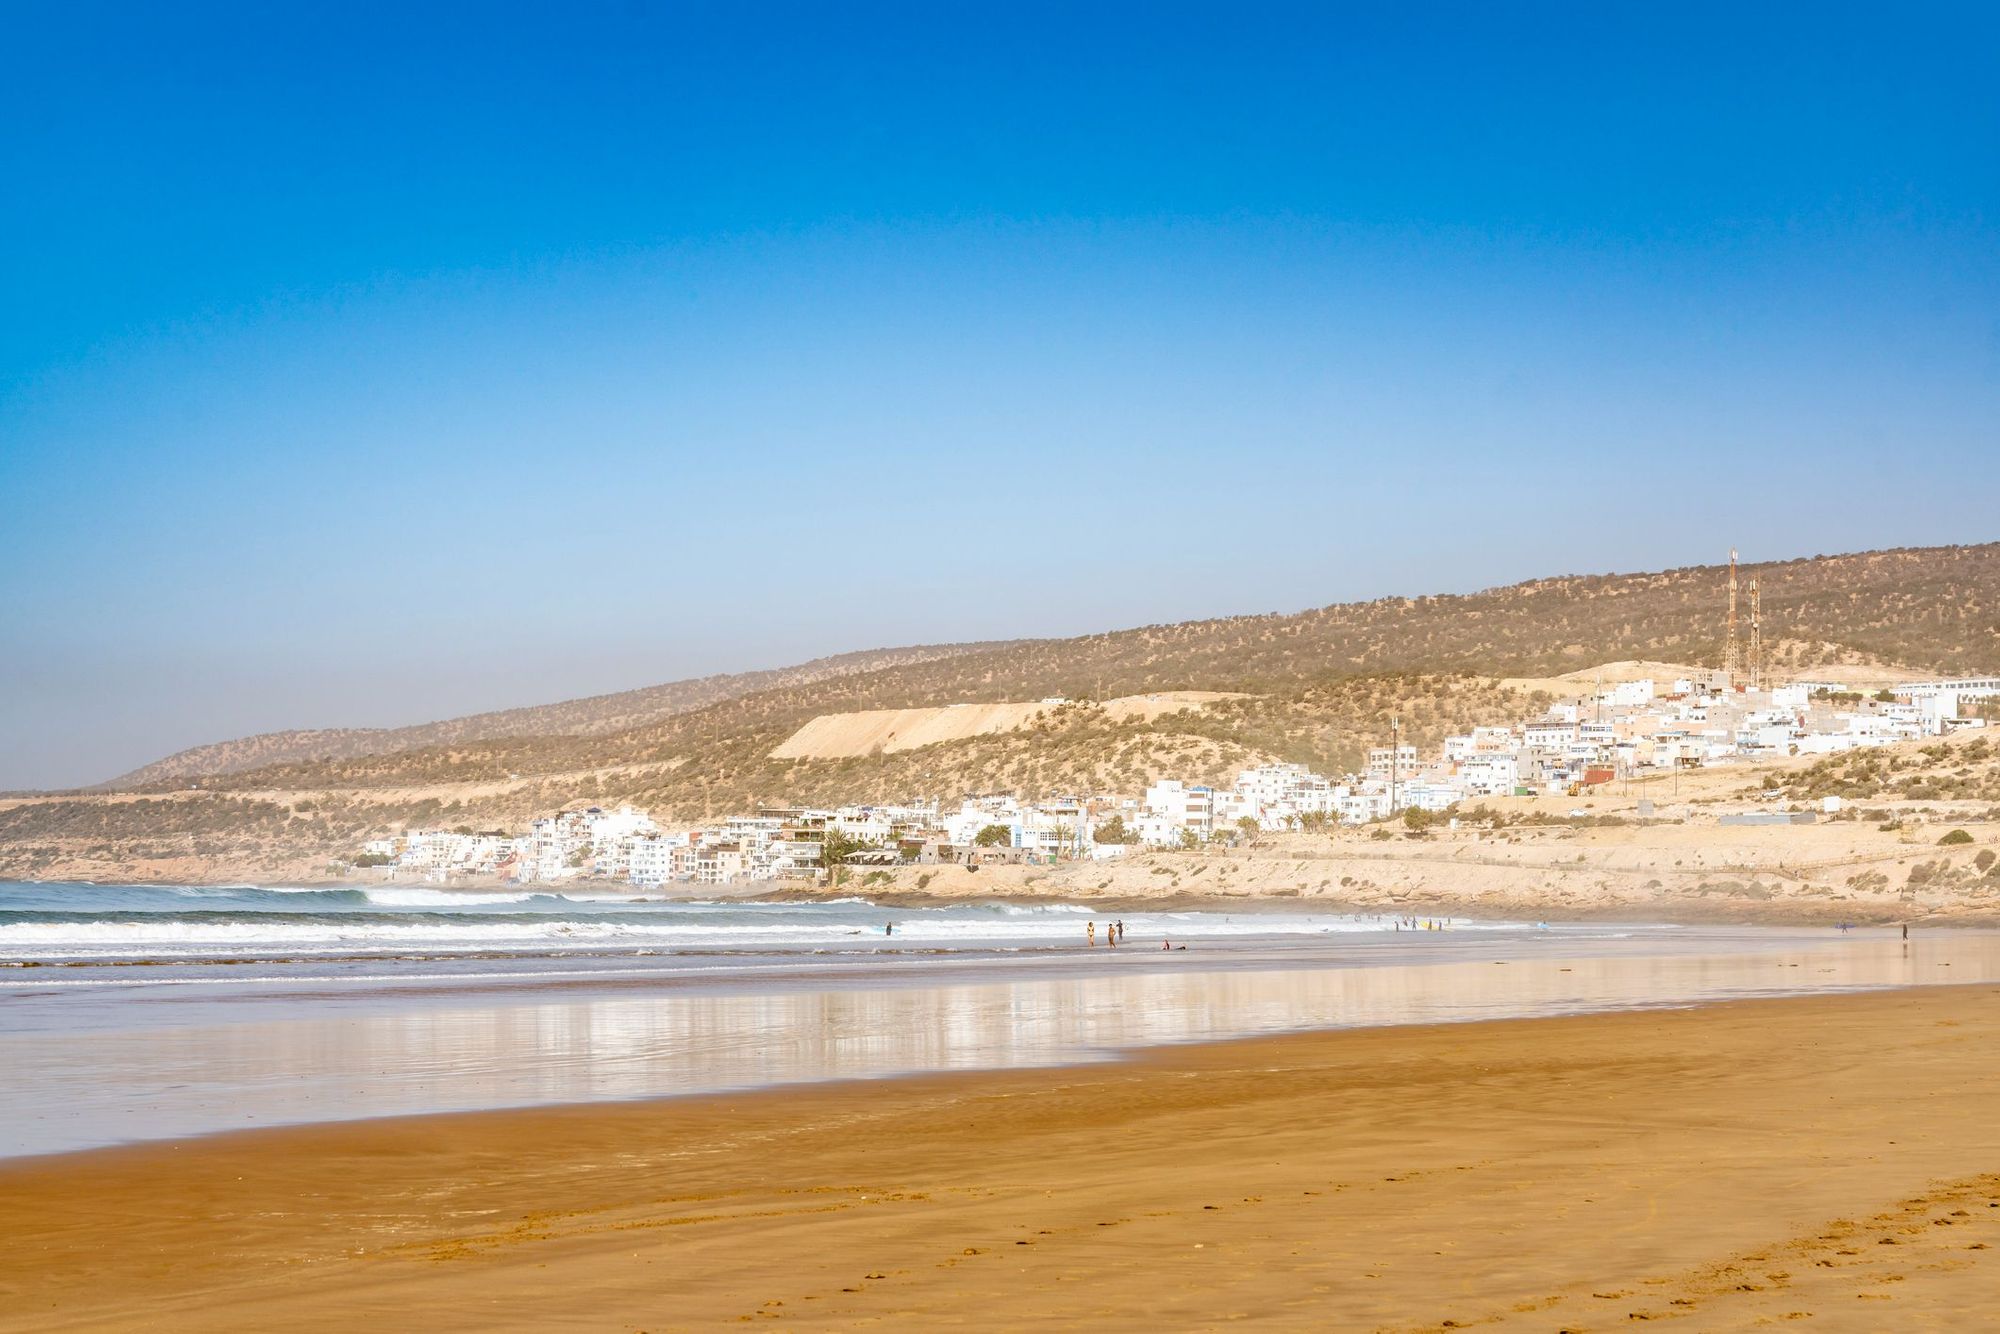 Taghazout, a popular surf spot in Morocco.